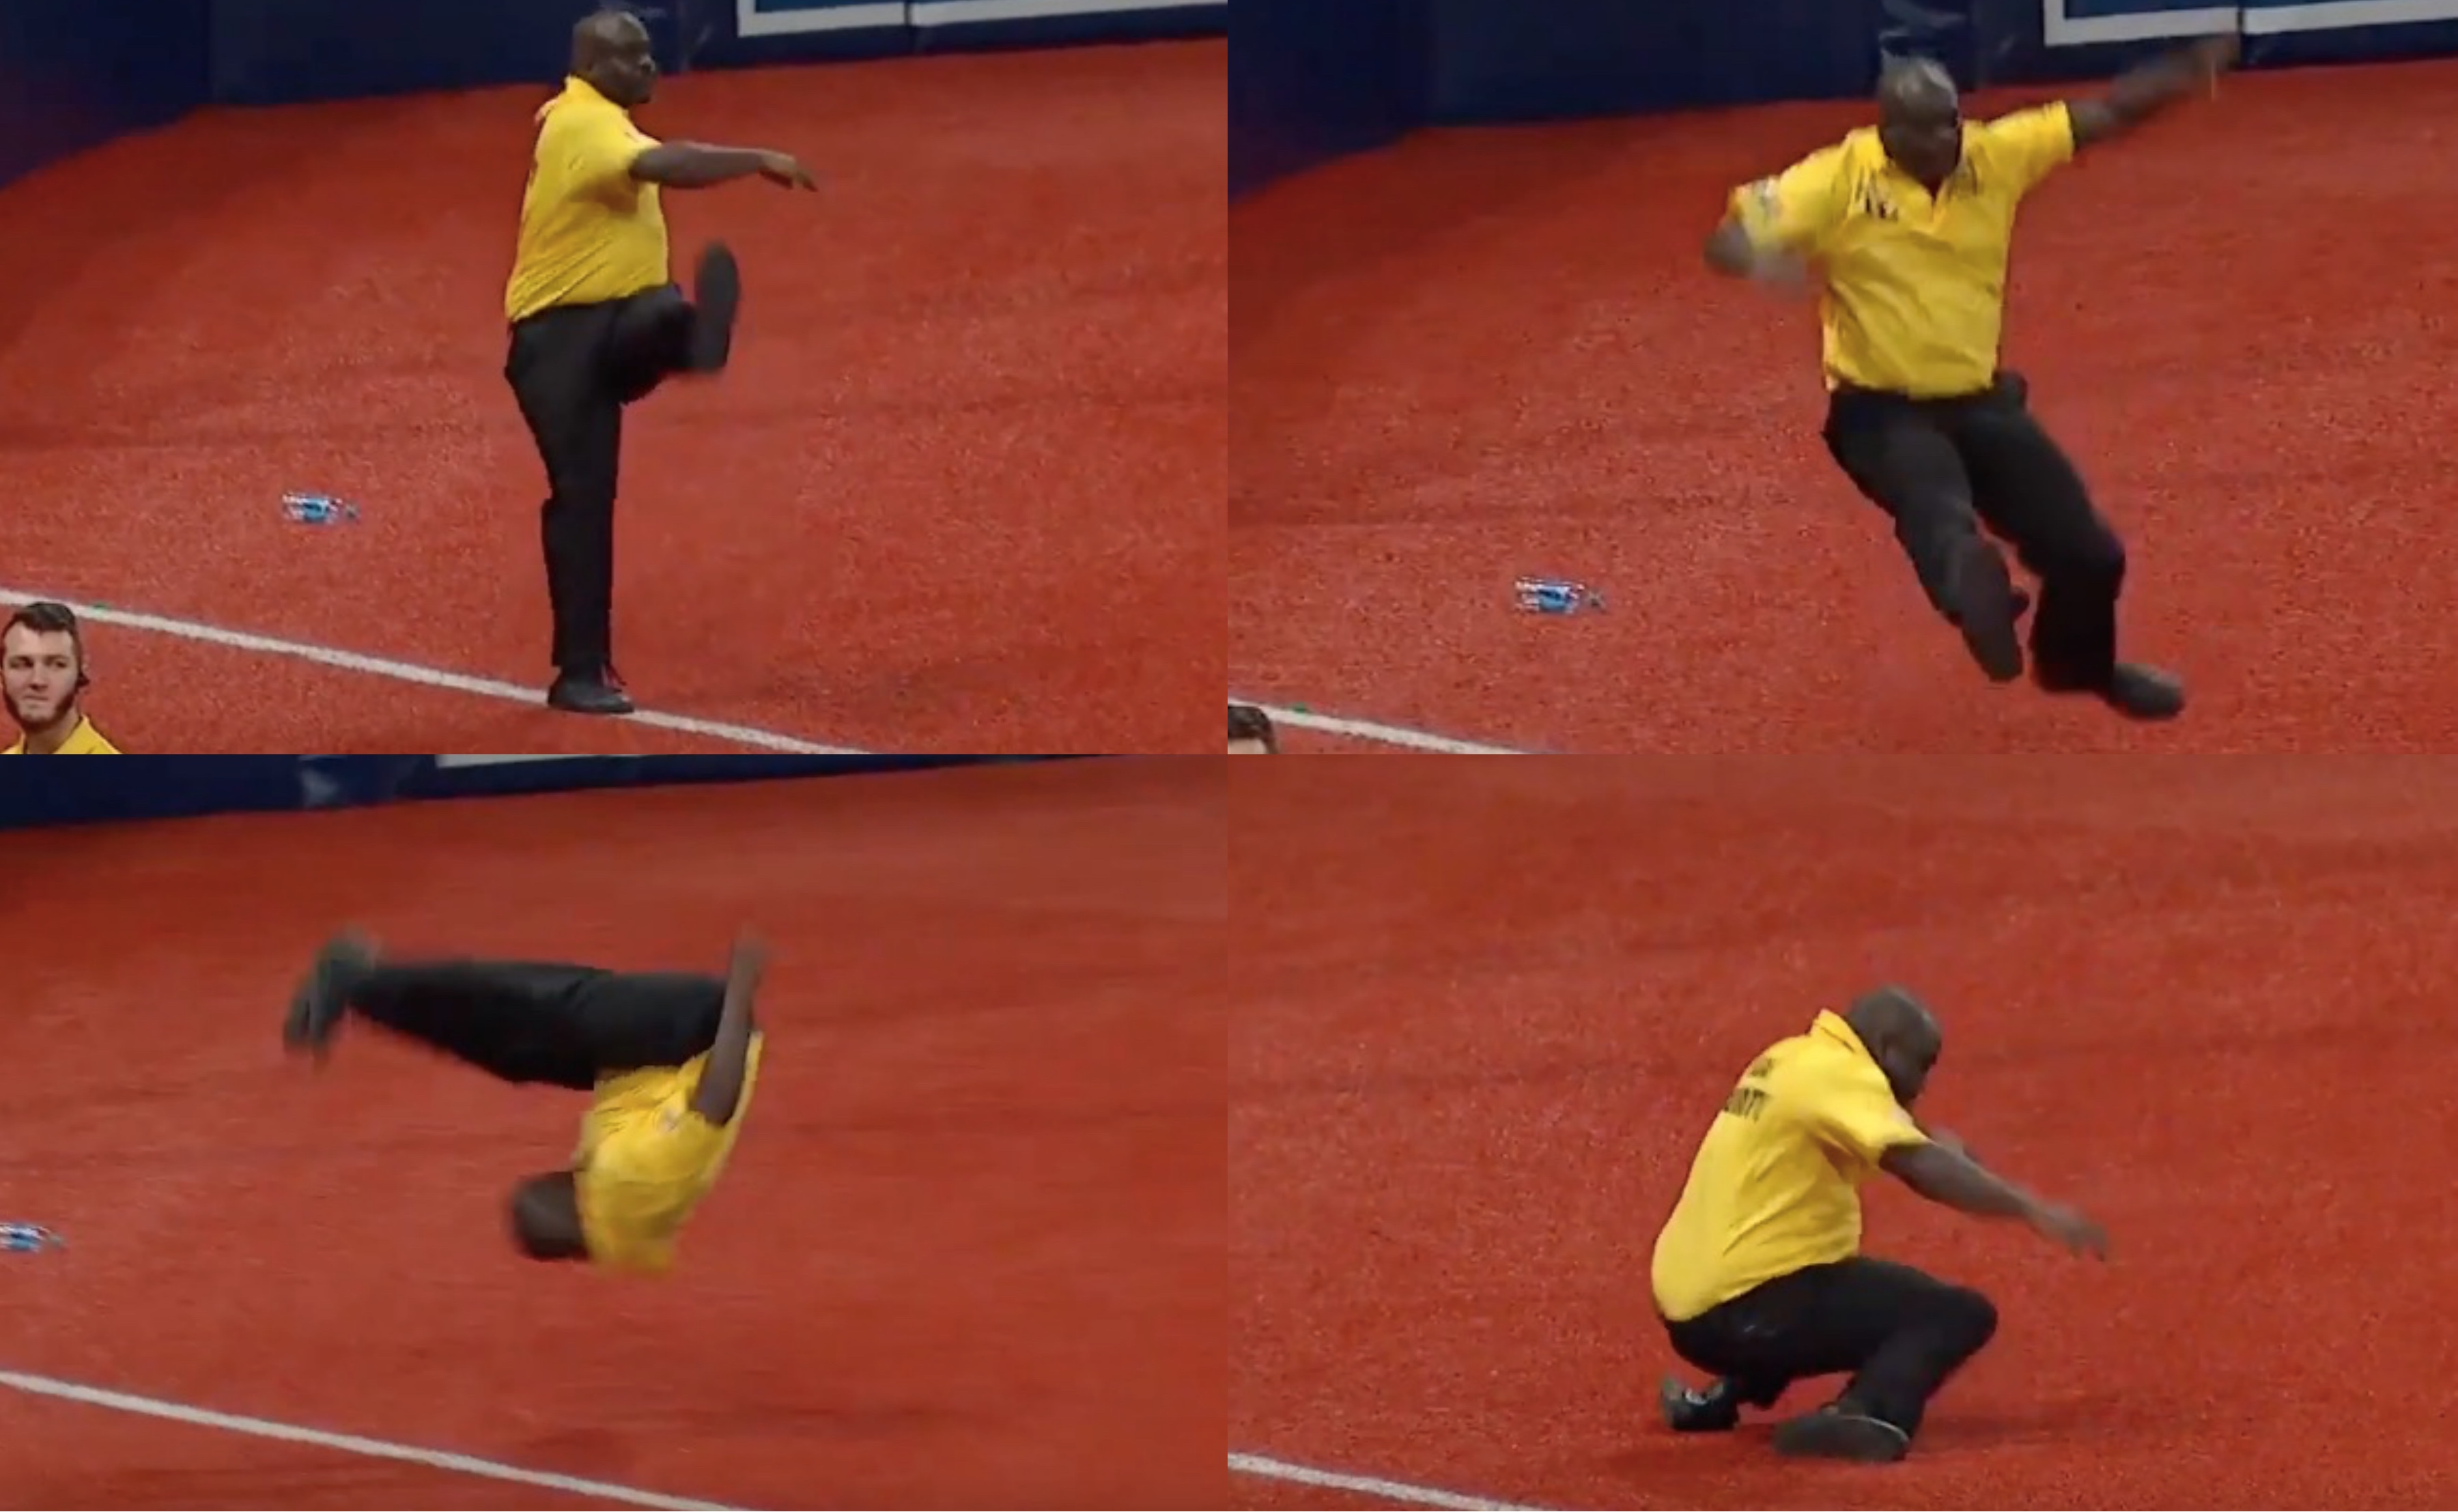 VIDEO: Houston security guard shows off impressive dance moves for